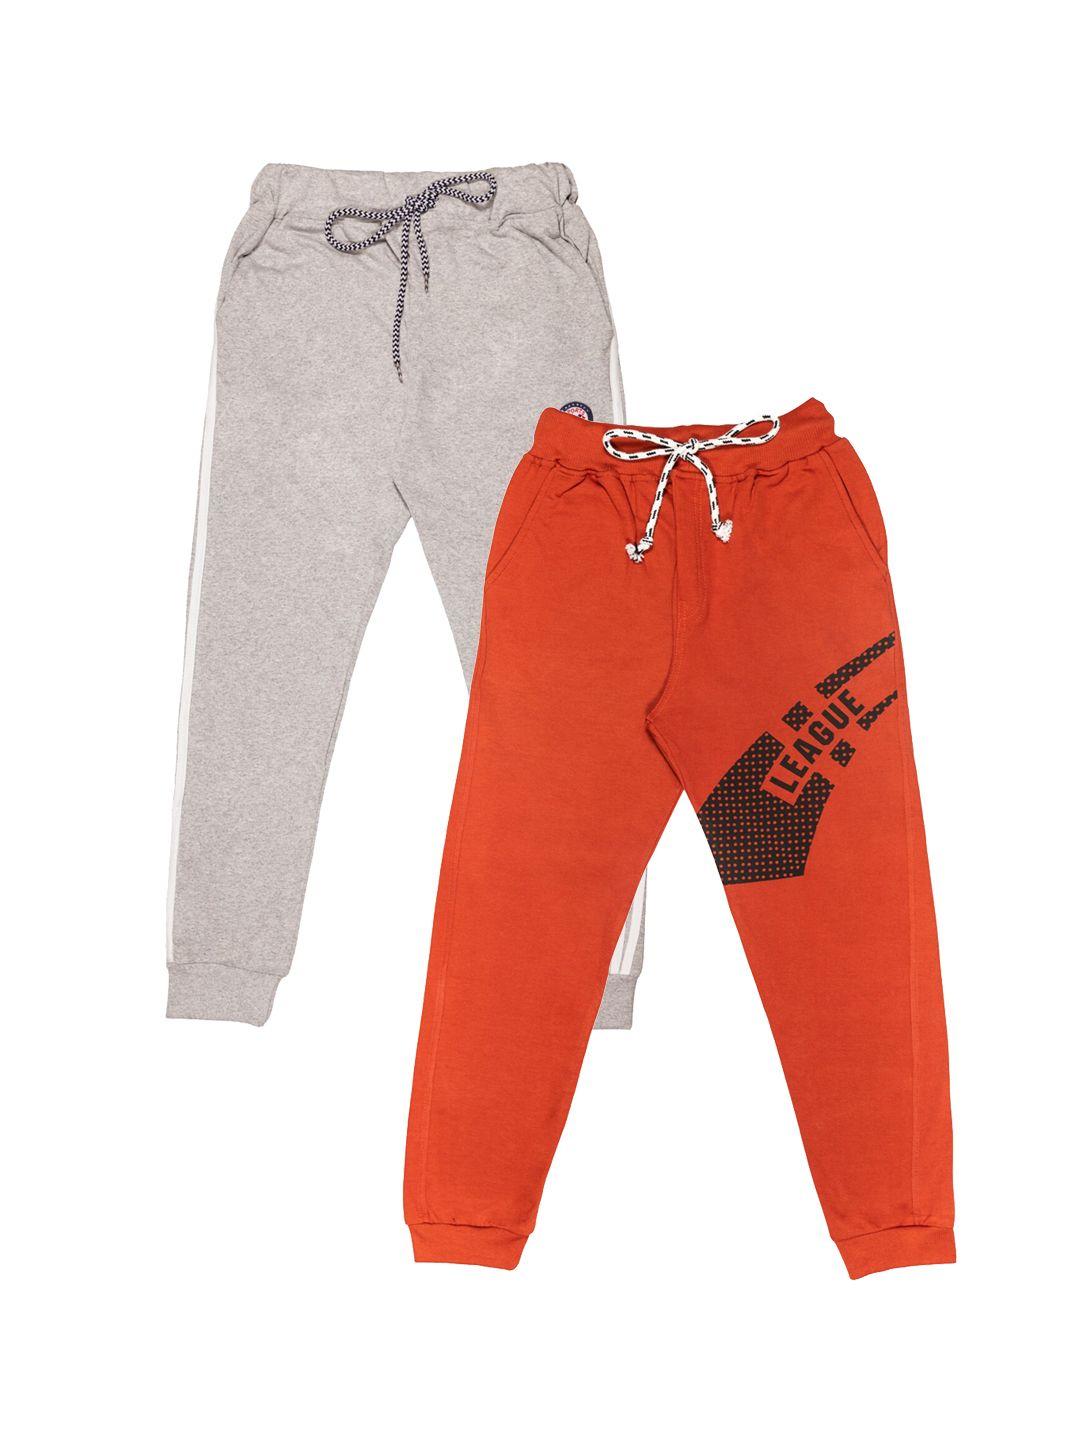 todd n teens boys pack of 2 grey & rust printed pure cotton joggers